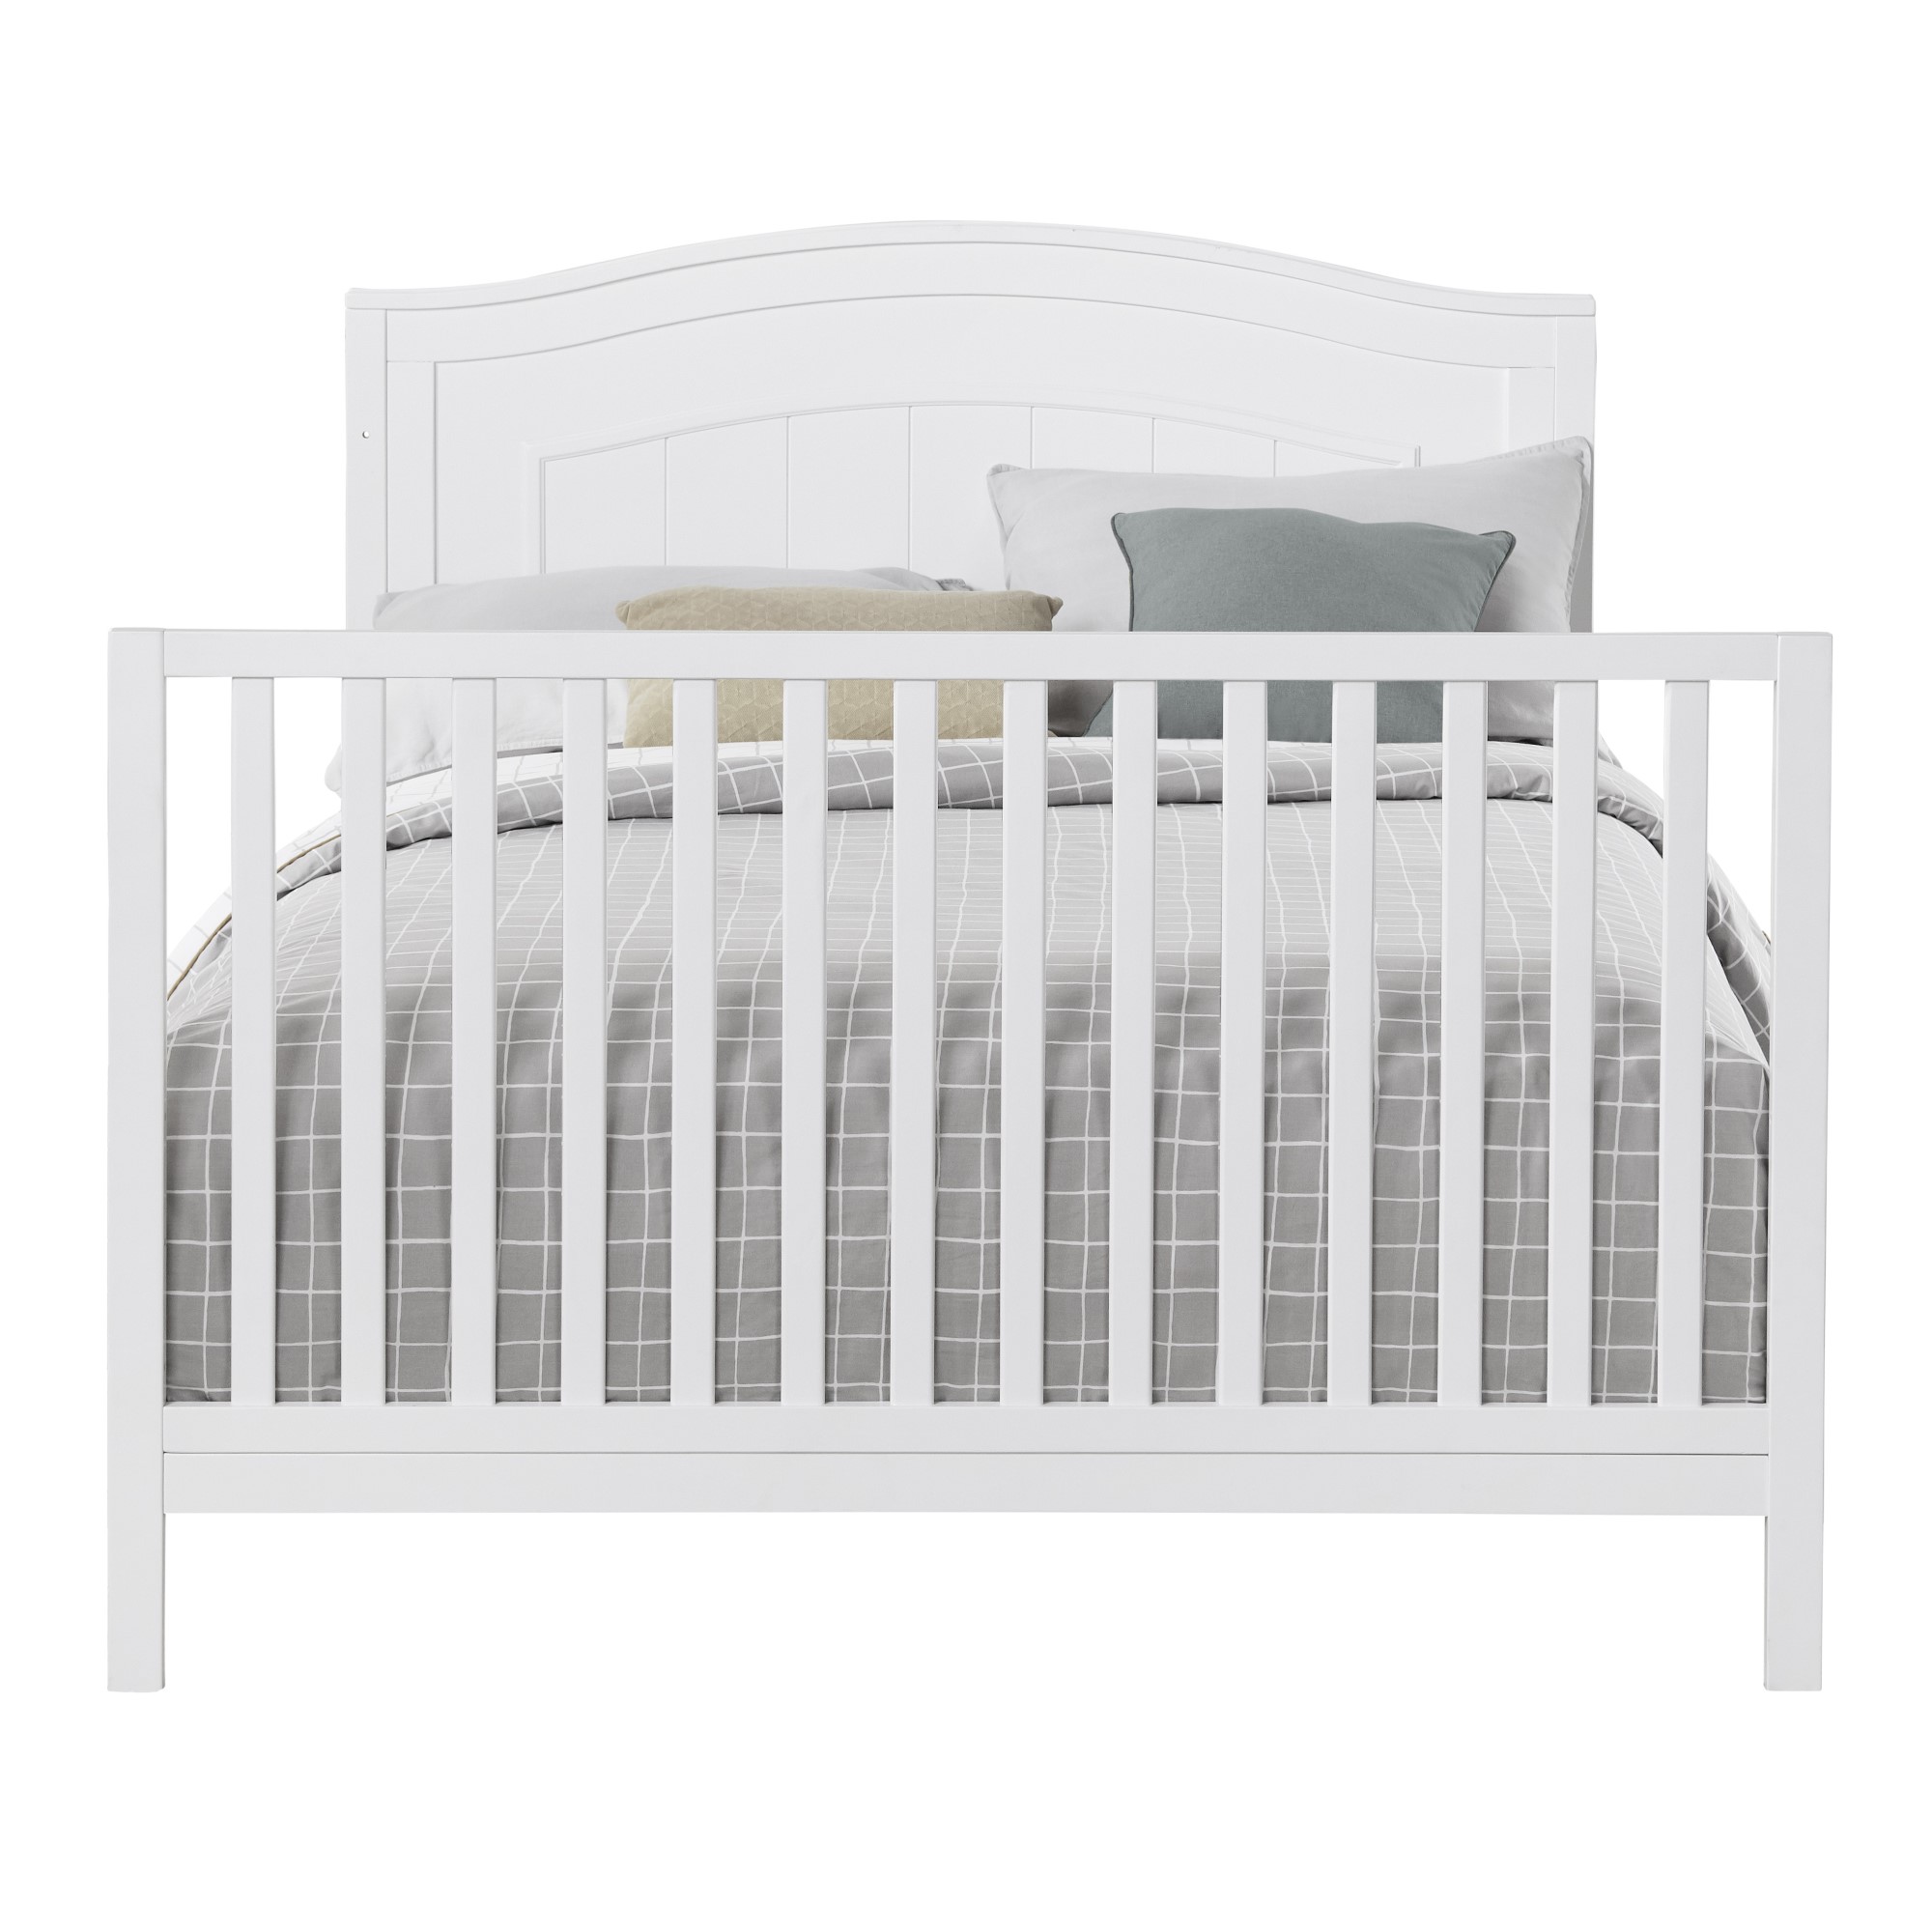 Oxford Baby North Bay 4-in-1 Convertible Crib, Snow White, GREENGUARD Gold Certified, Wooden Crib - image 4 of 4